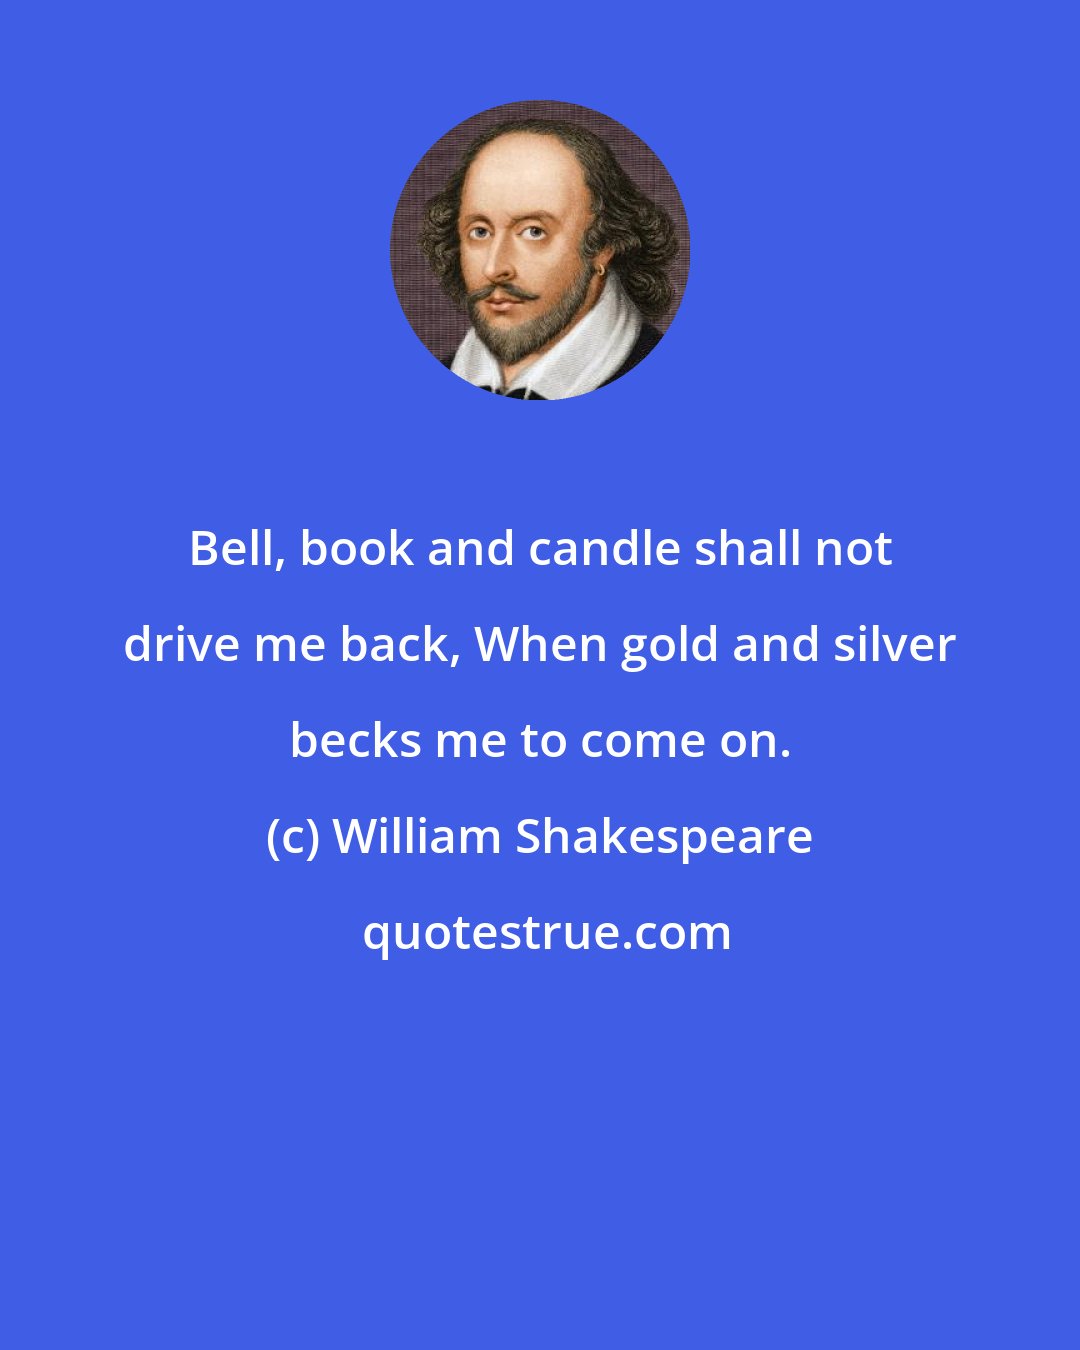 William Shakespeare: Bell, book and candle shall not drive me back, When gold and silver becks me to come on.